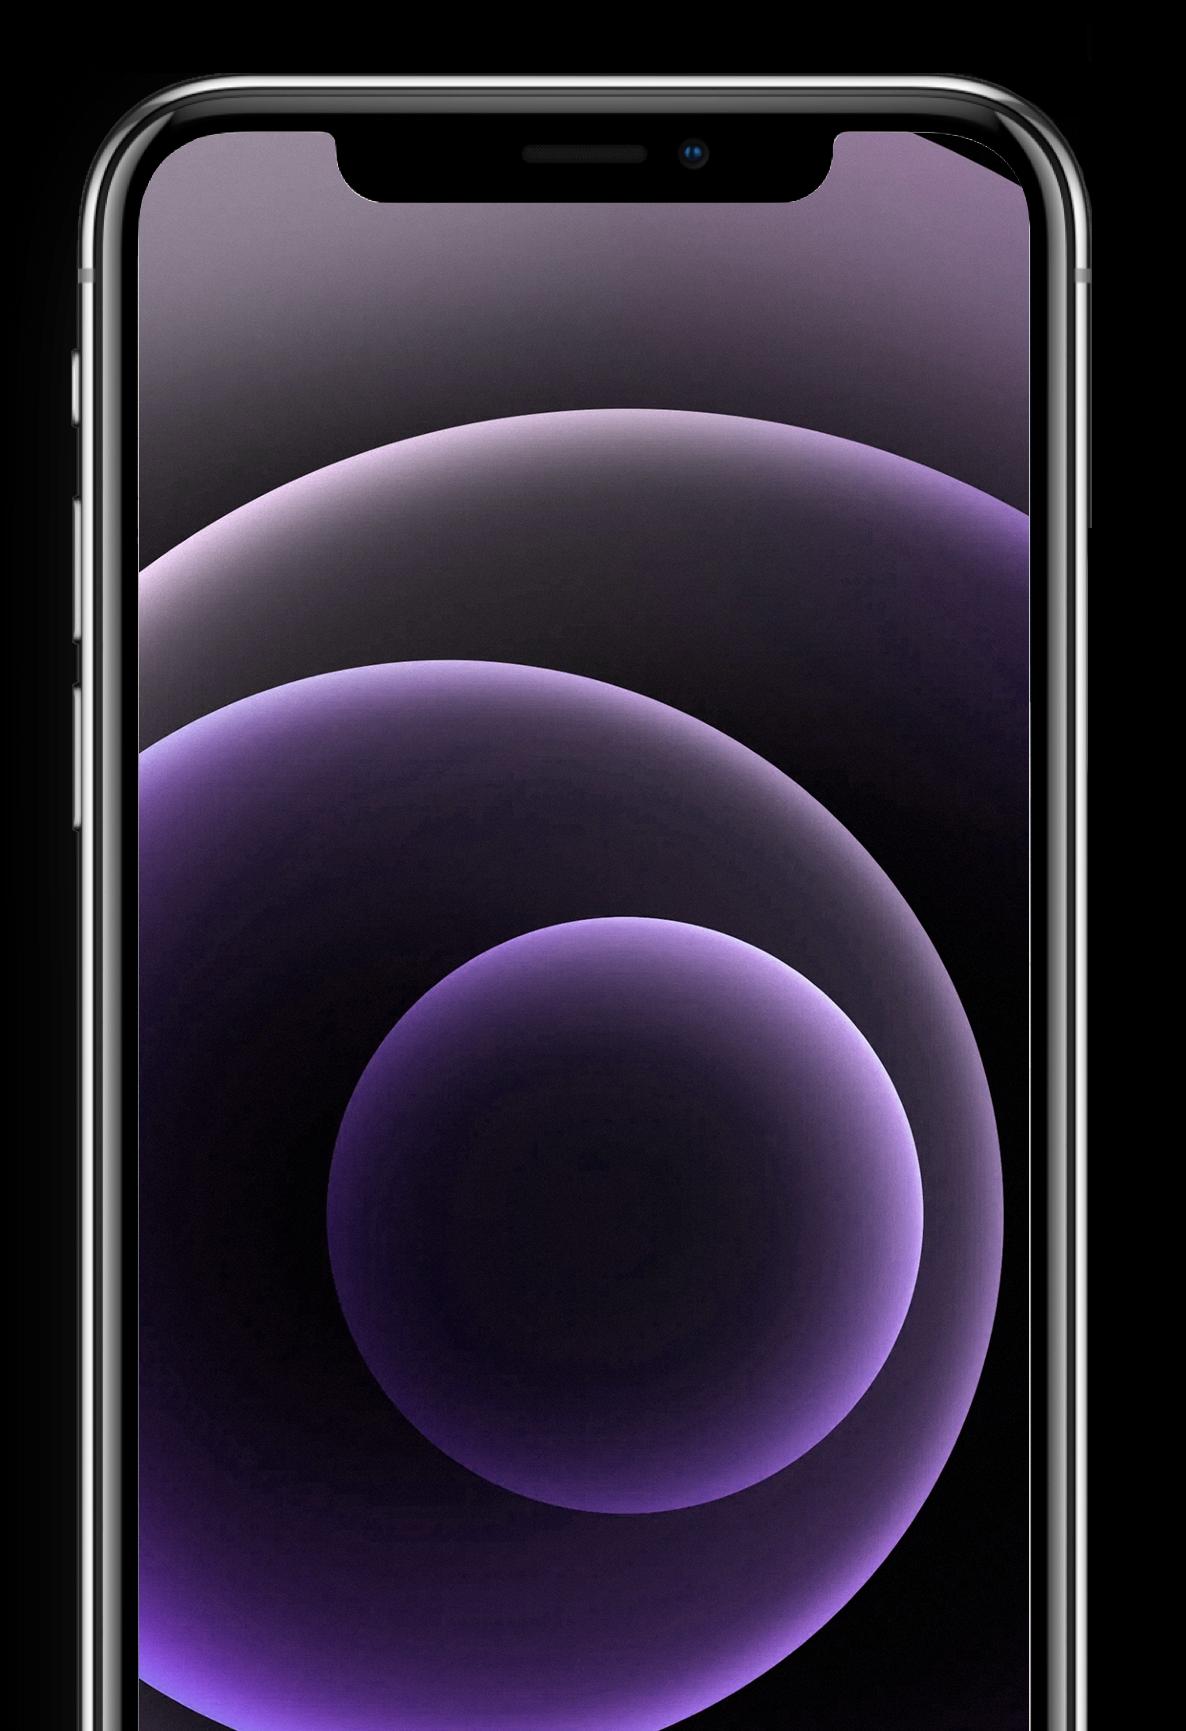 Iphone 12 Pro Wallpapers 4k For Android Apk Download